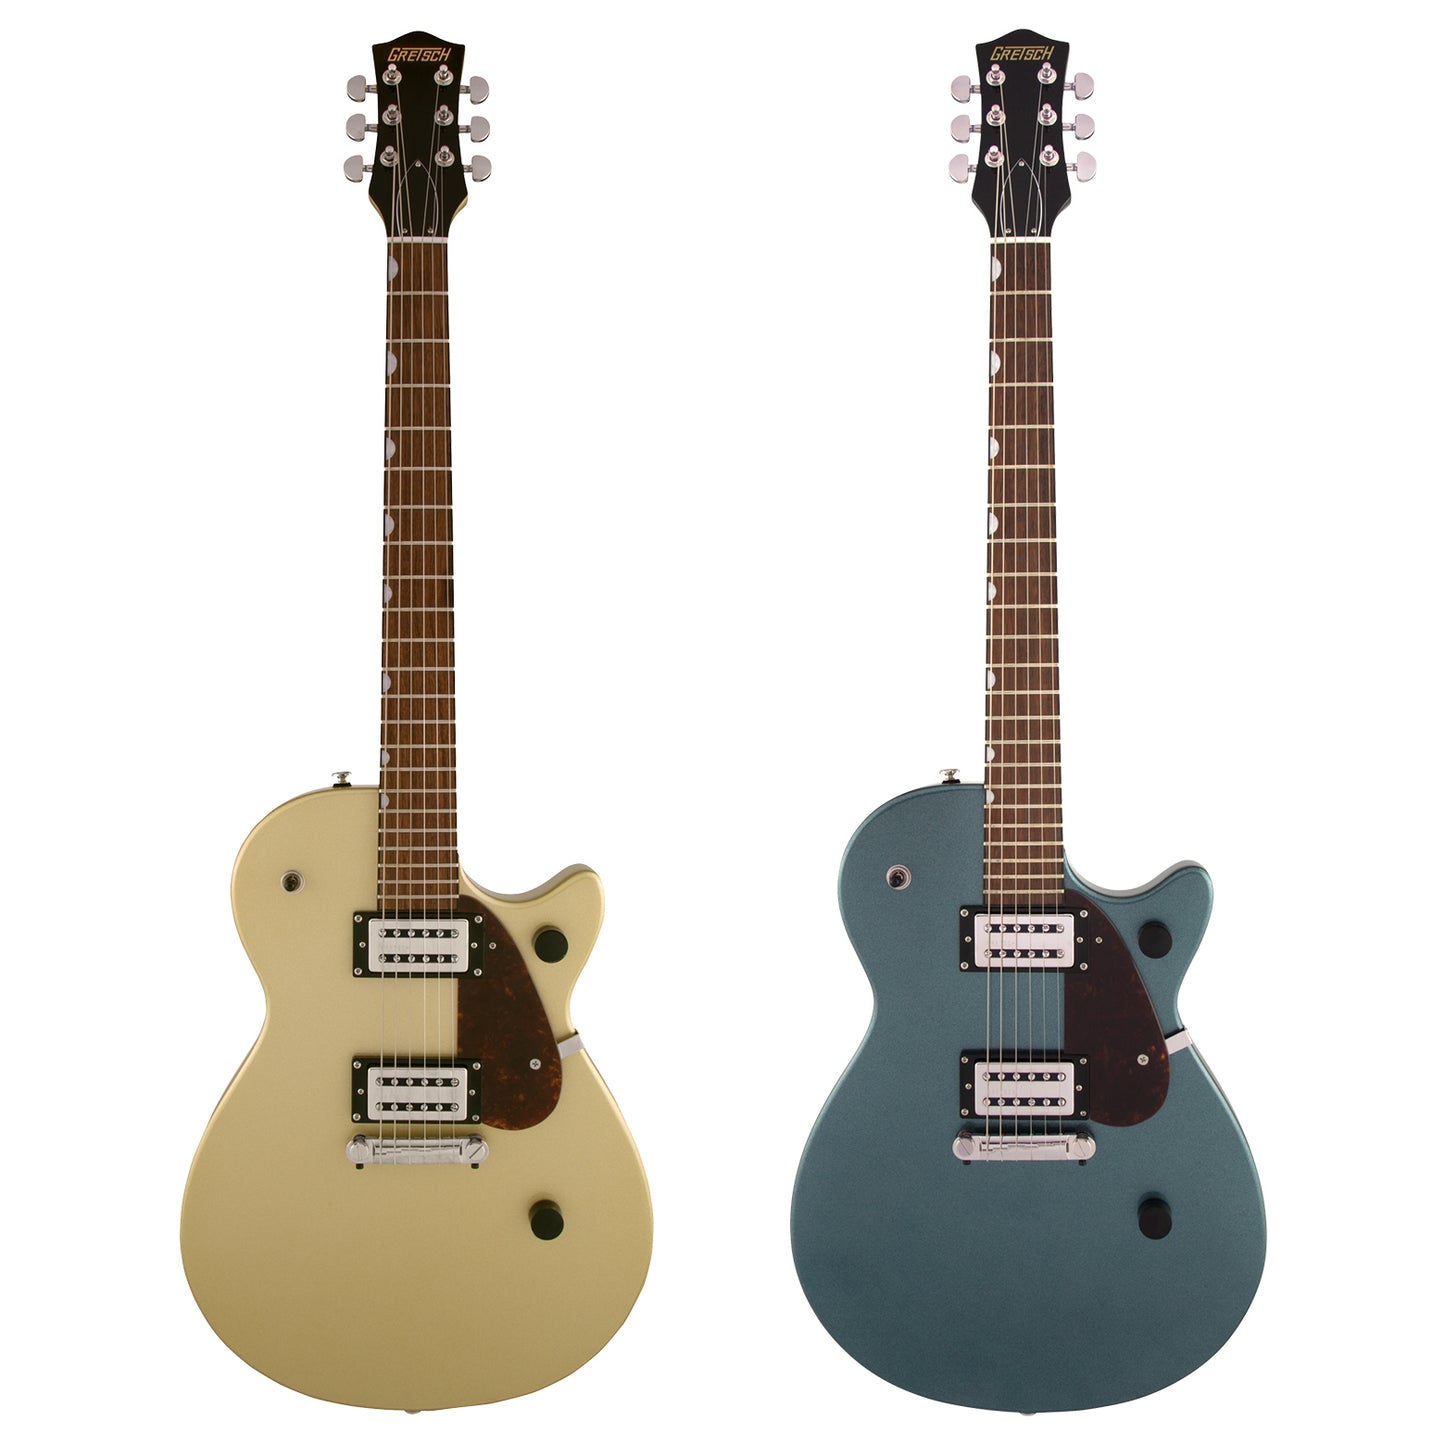 Gretsch G2210 Streamliner Junior Jet Club Jr Electric Guitar with Solid Nato Body, Vintage Style Knobs, Right-Handed (Golddust, Gunmetal)